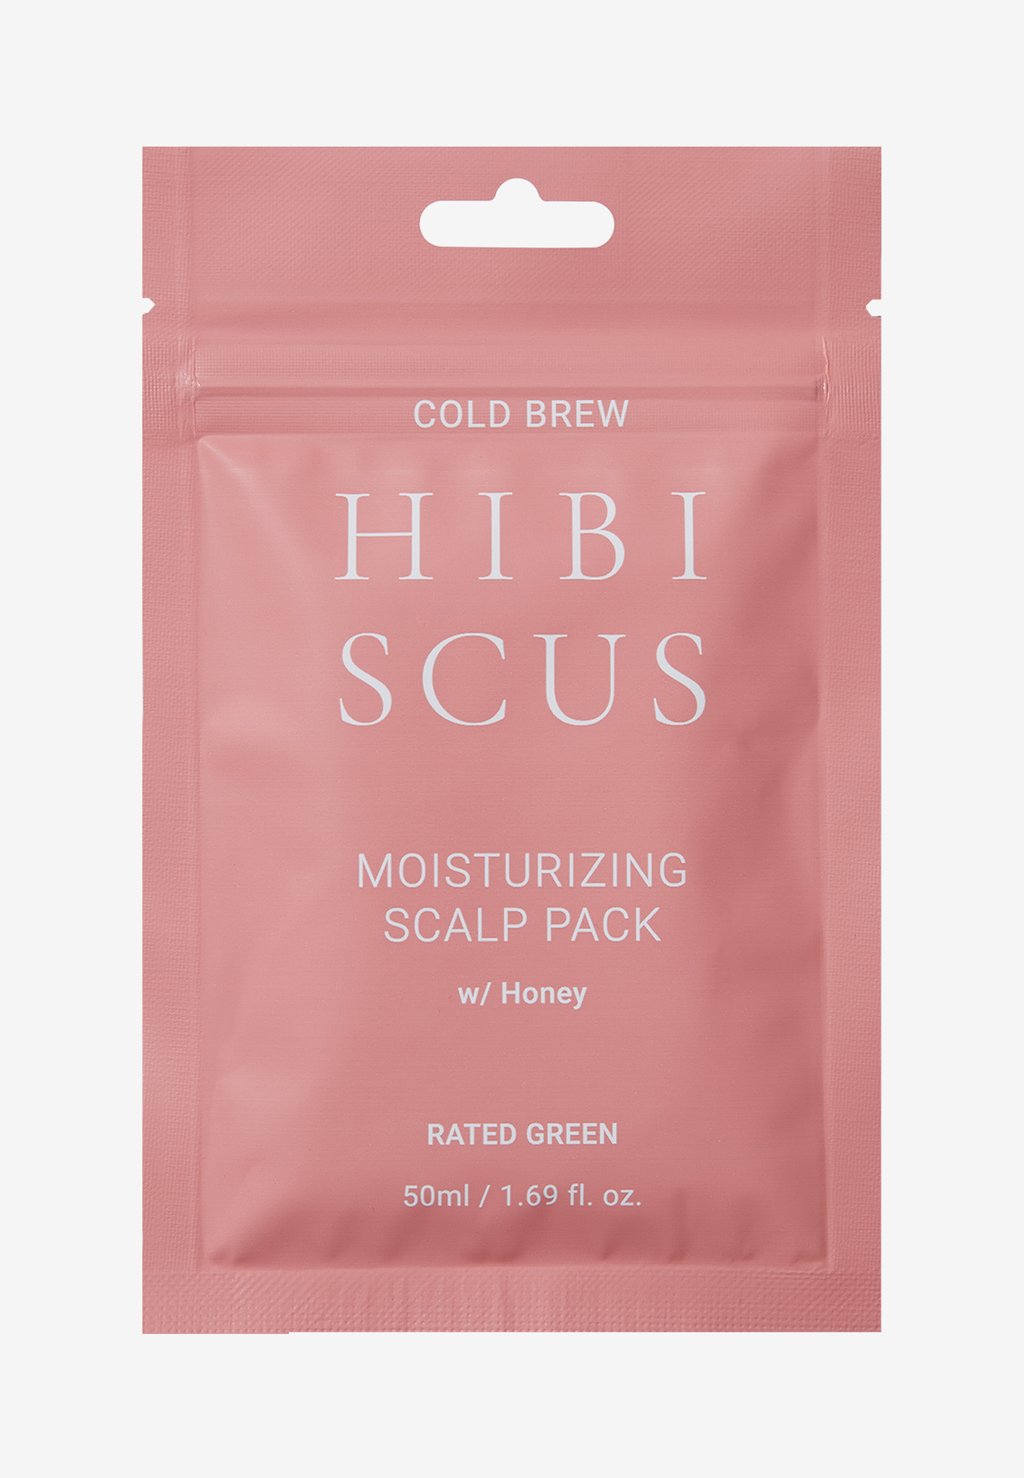 Набор для волос Cold Brew Hibiscus Moisturizing Scalp Pack W/Med 2 Pack RATED GREEN rated green cold brew hibiscus moisturizing scalp pack